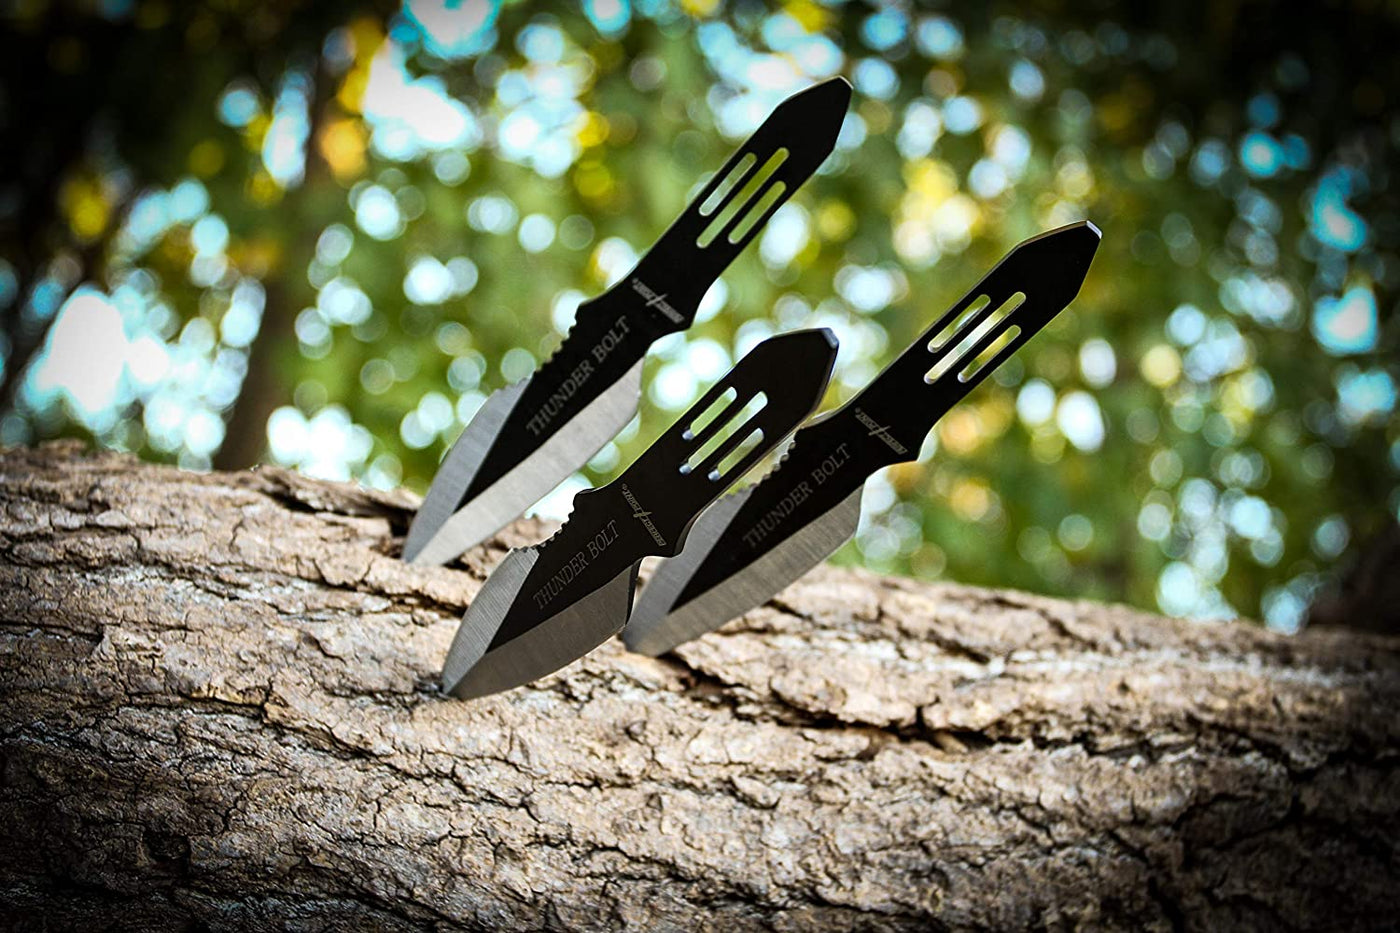 Perfect Point Throwing Knives – Set of 3 – Black/Satin Finish Blades w/ Thunder Bolt Etching, Black Stainless Steel Handles, Nylon Sheath, Full Tang, Well Balanced, Sport Knives – RC-595-3